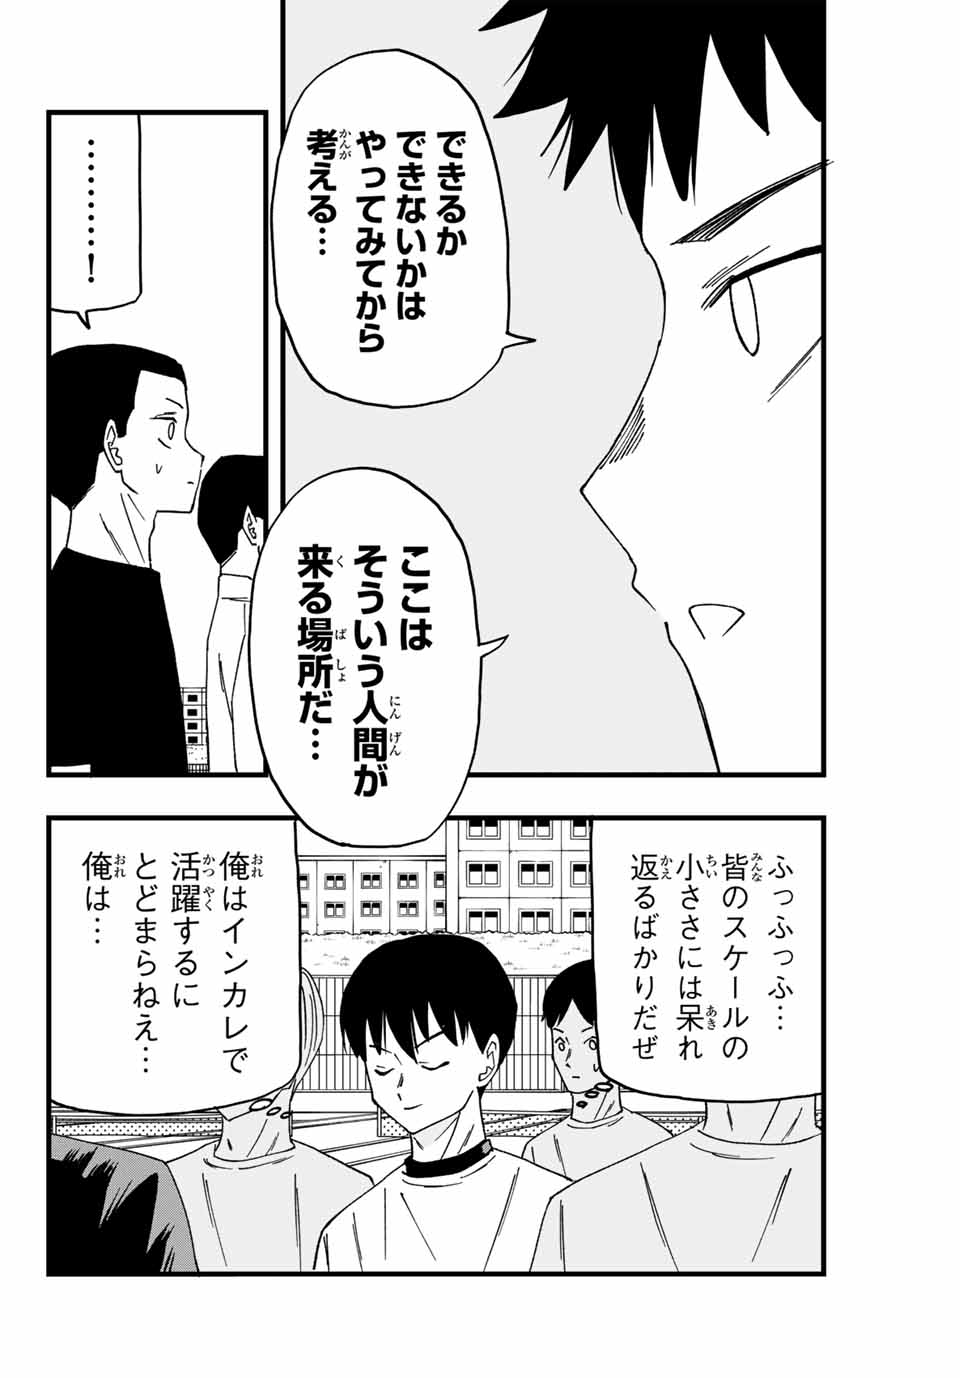 LoVE GAME 第3話 - Page 4